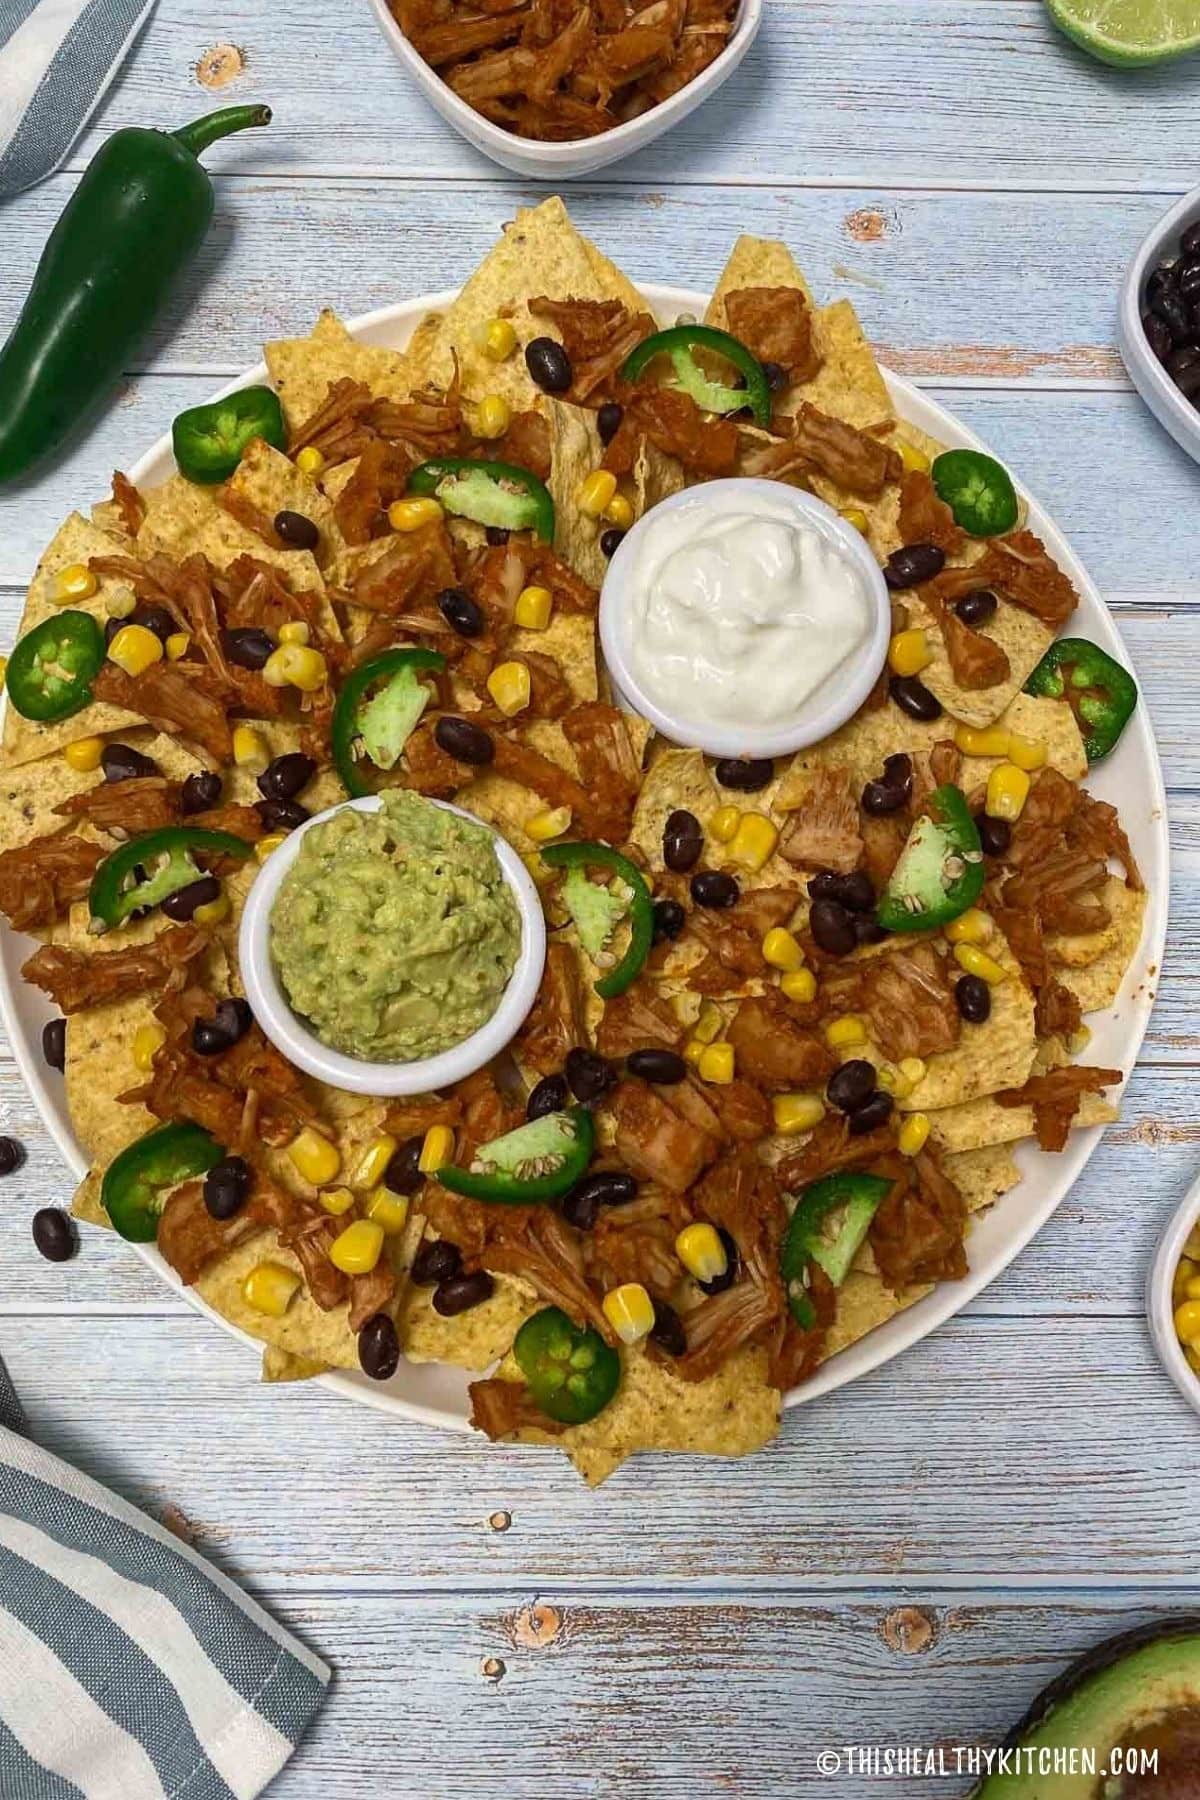 Nachos with jackfruit, corn and beans with sauce.